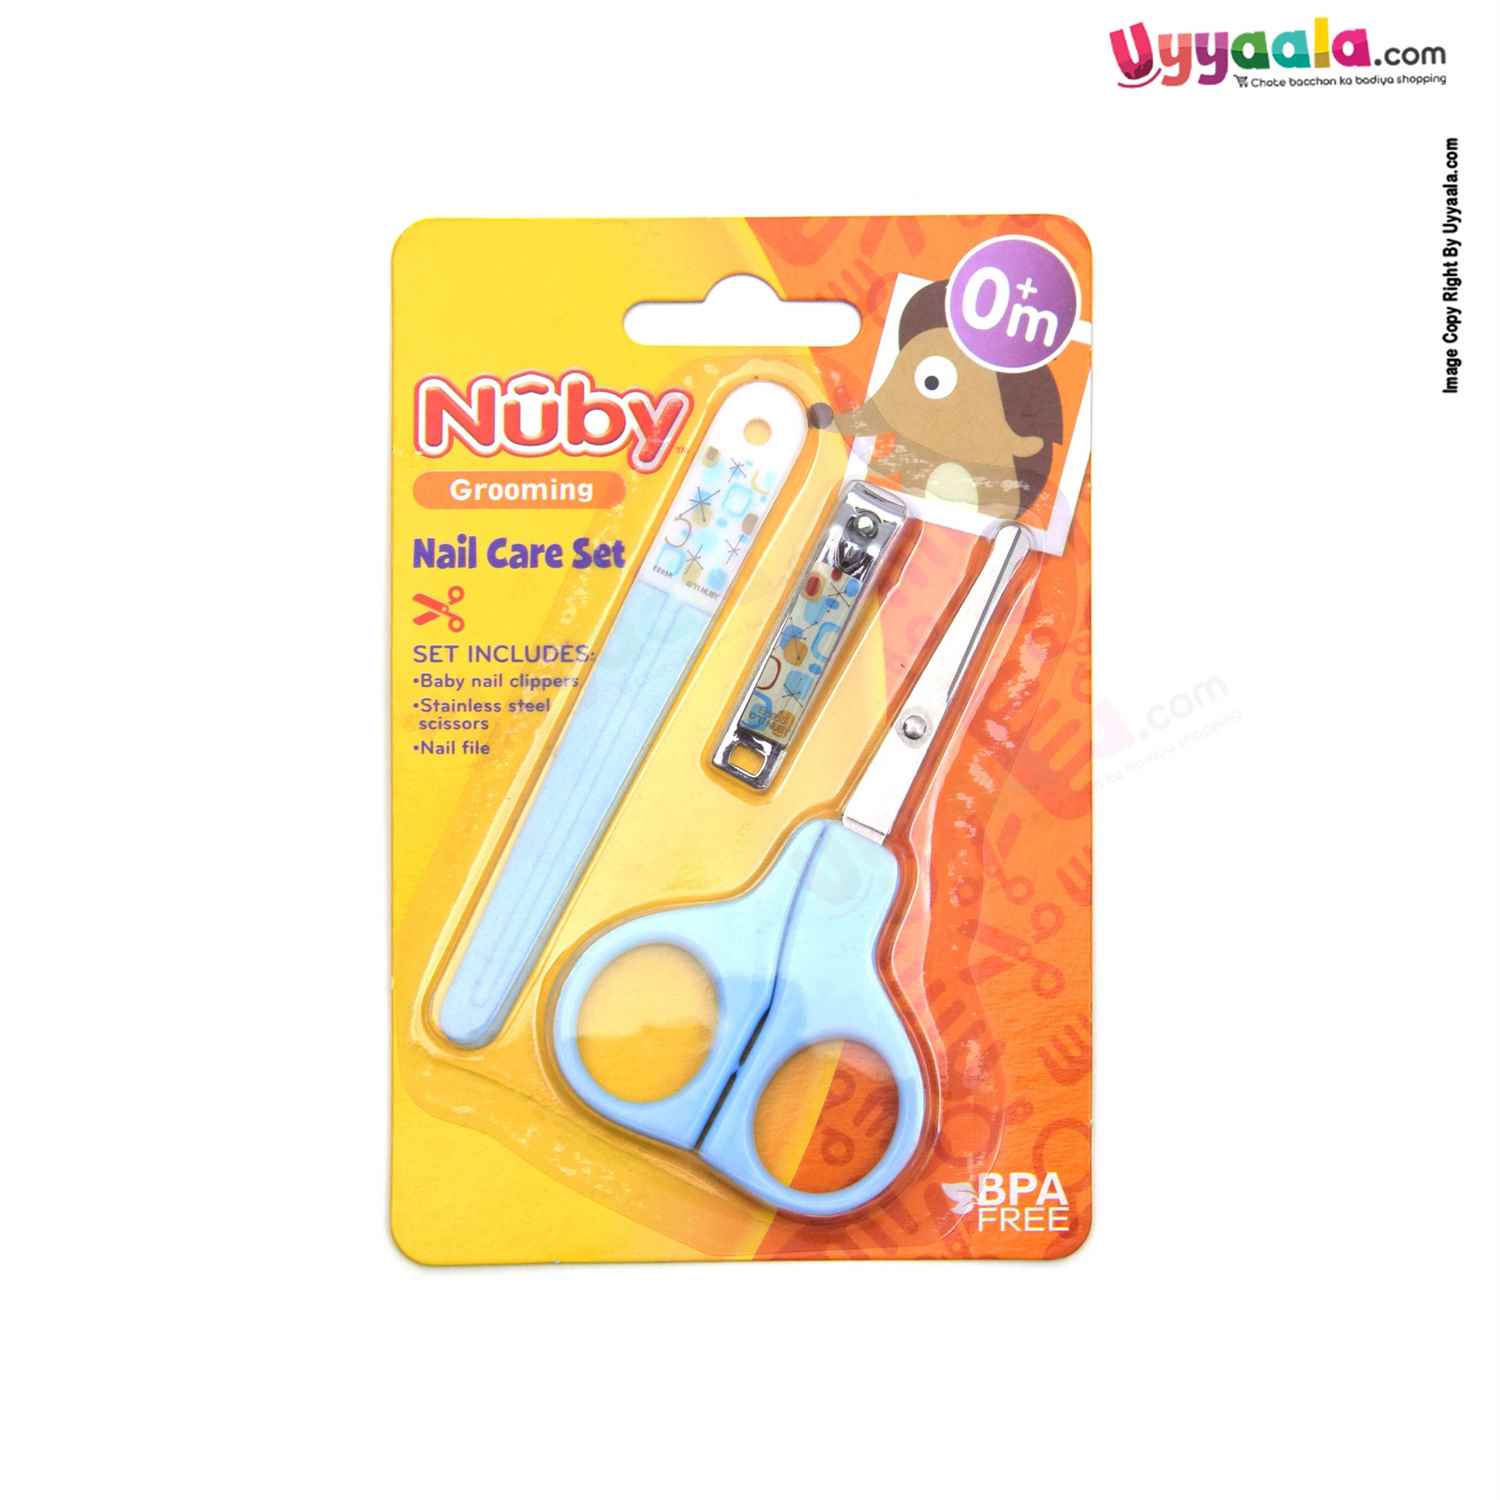 NUBY Grooming set for baby nail care - 0+m